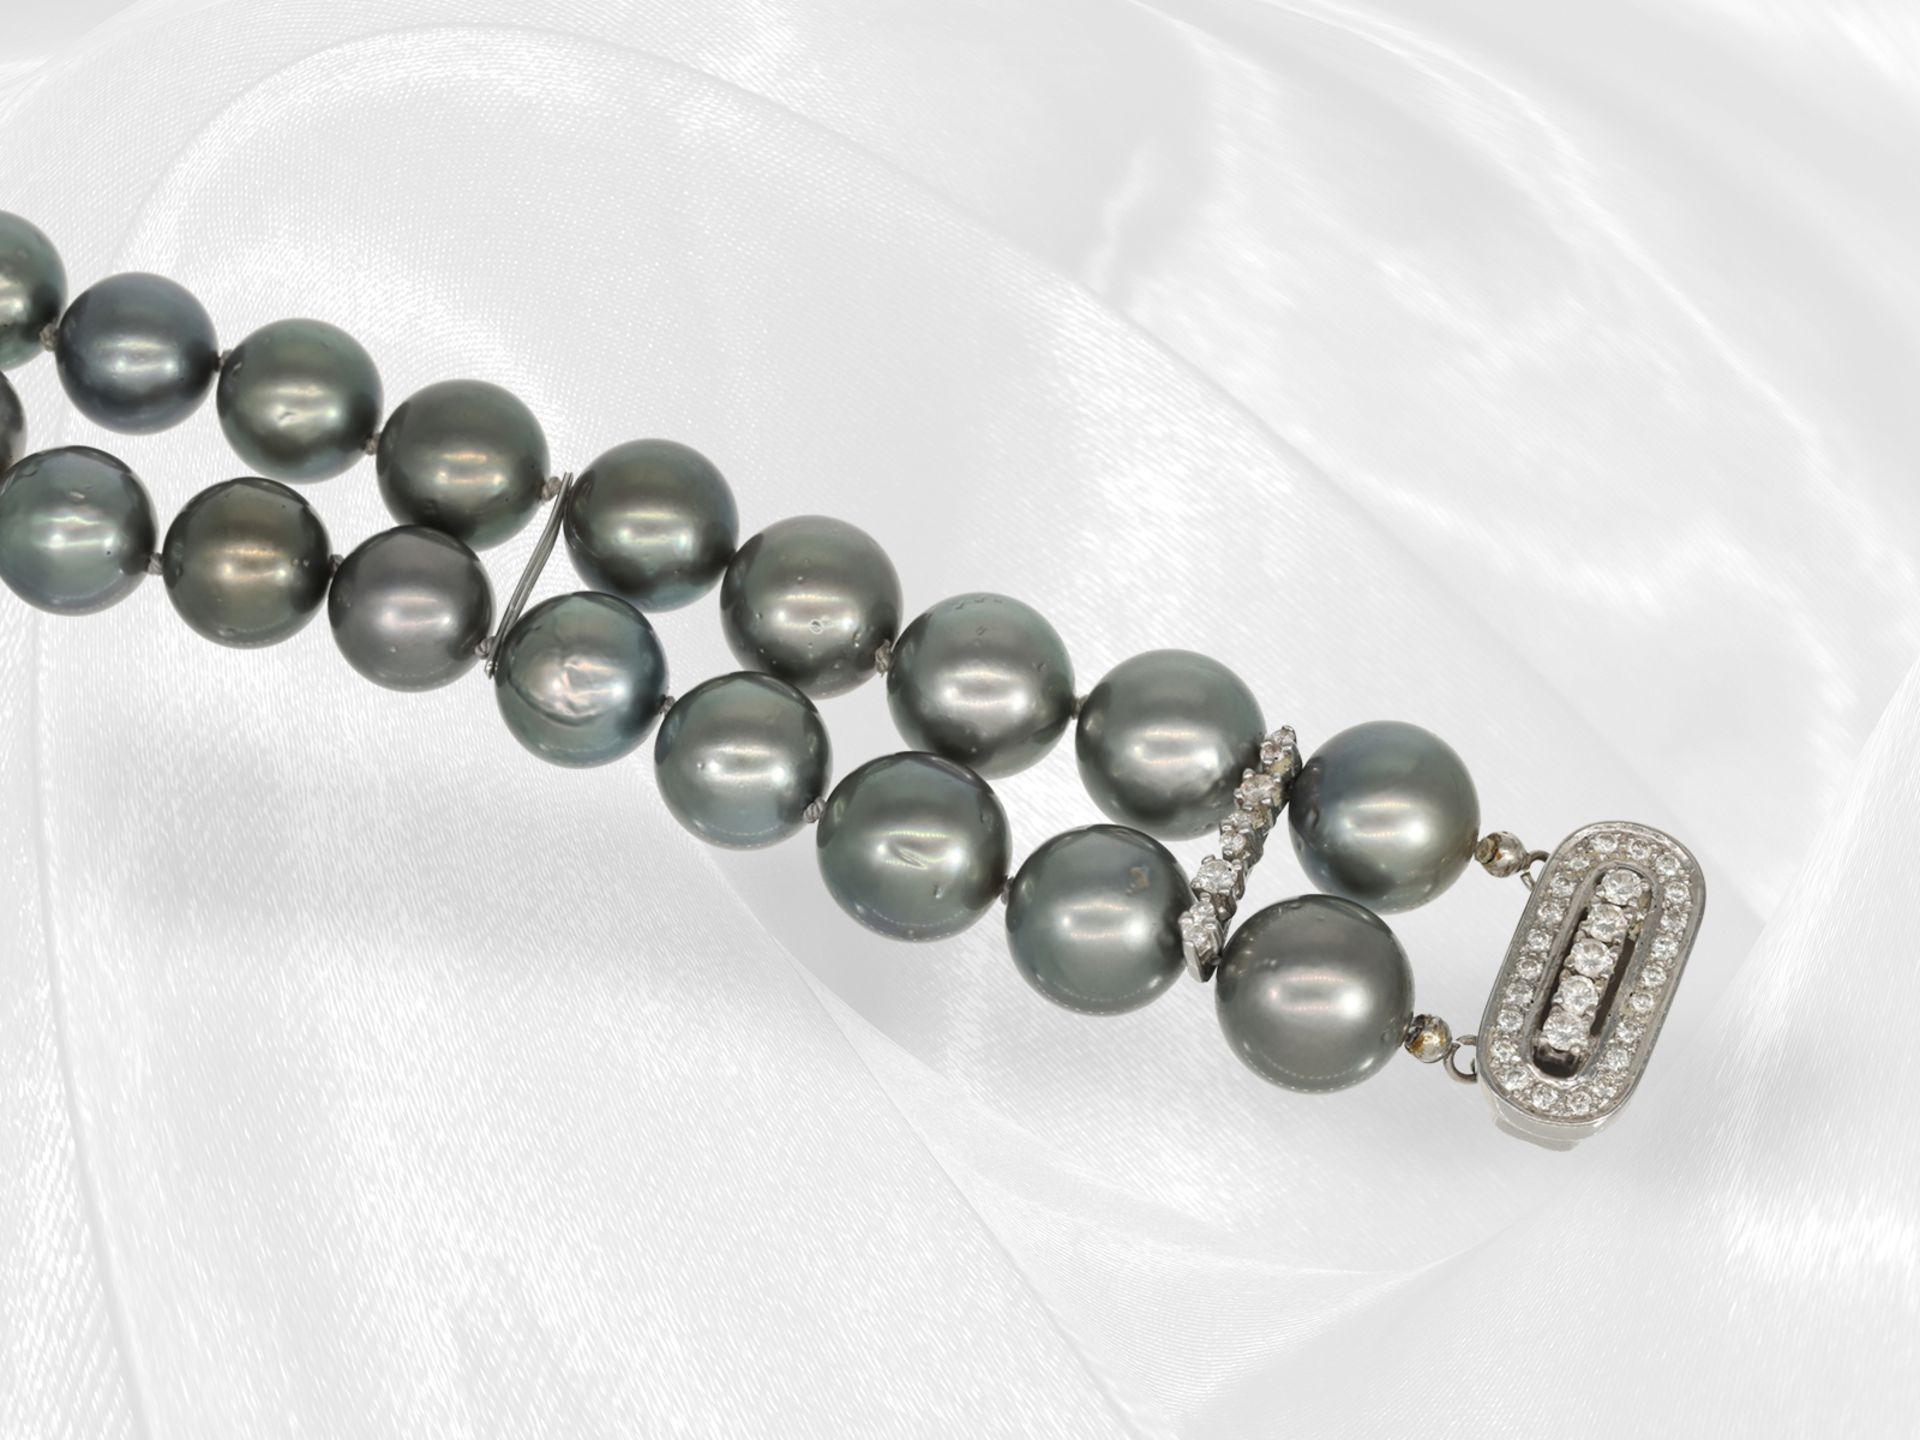 Very decorative double row Tahiti cultured pearl bracelet, 14K white gold clasp set with brilliant-c - Image 3 of 6